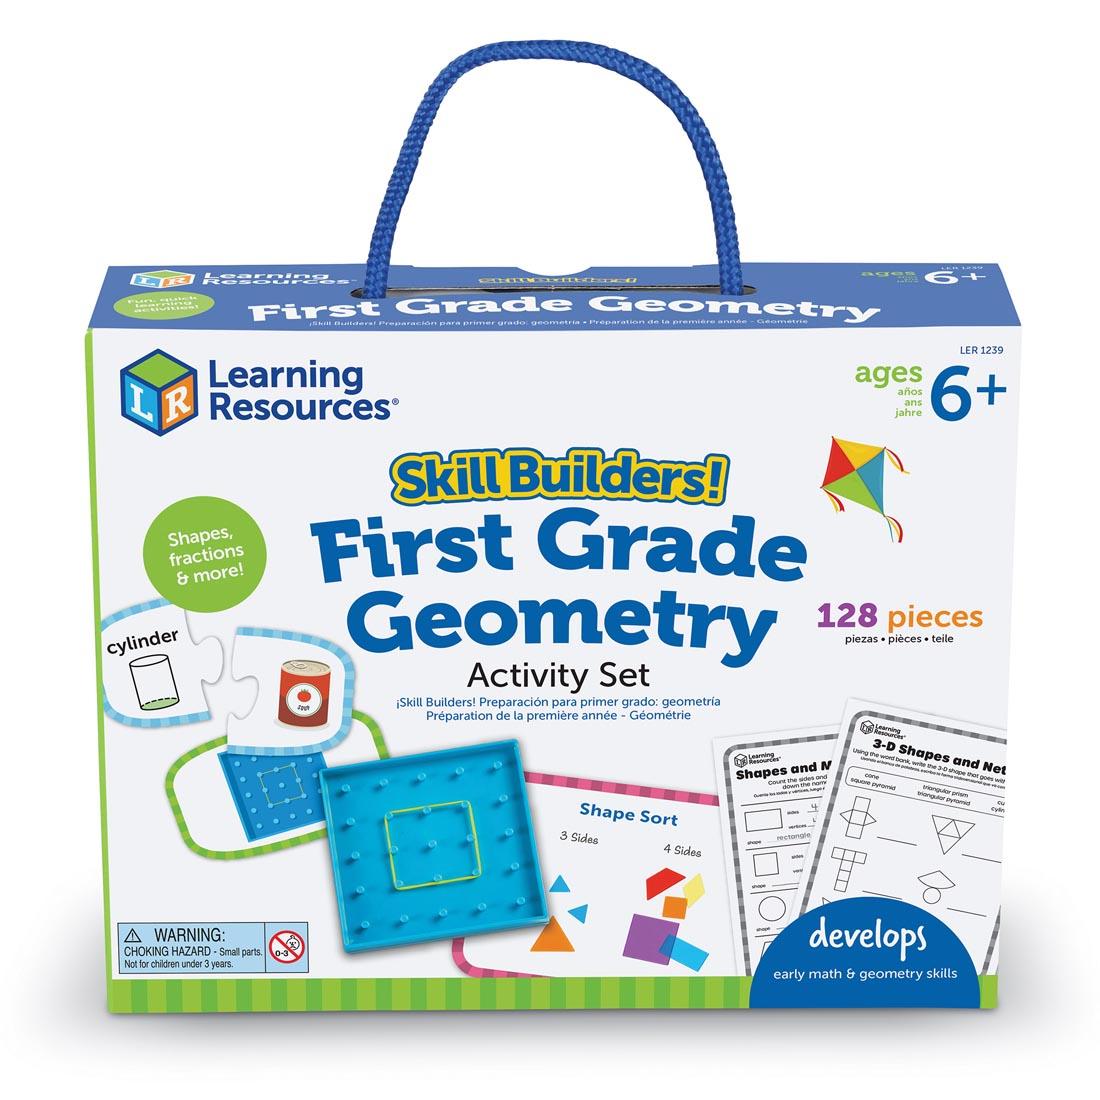 Box of Skill Builders! First Grade Geometry Activity Set By Learning Resources